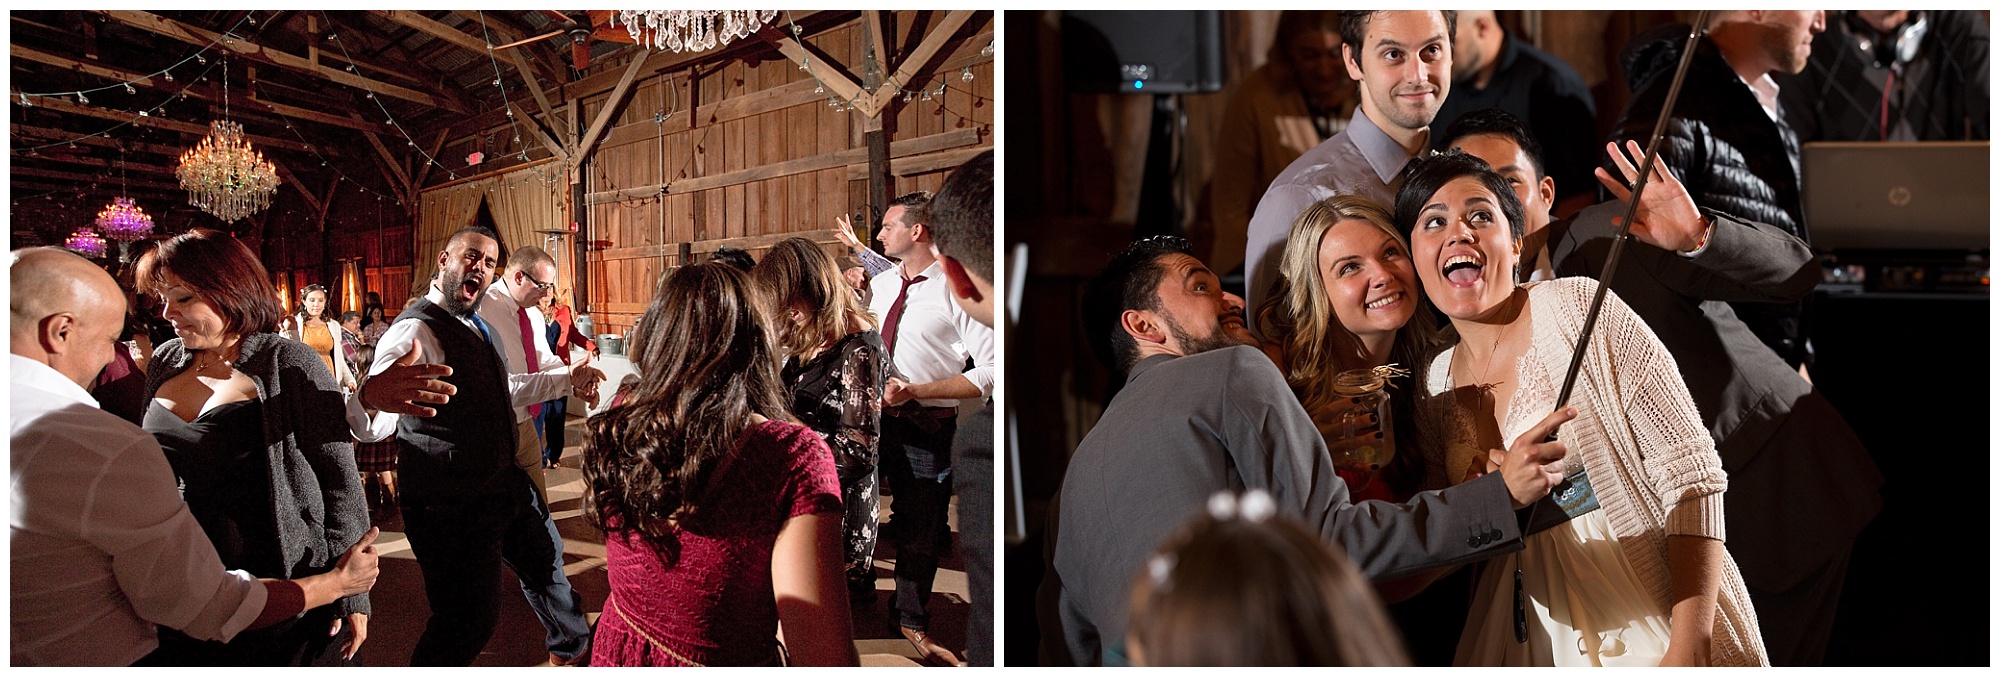 Photos of dancing during a lively wedding reception.